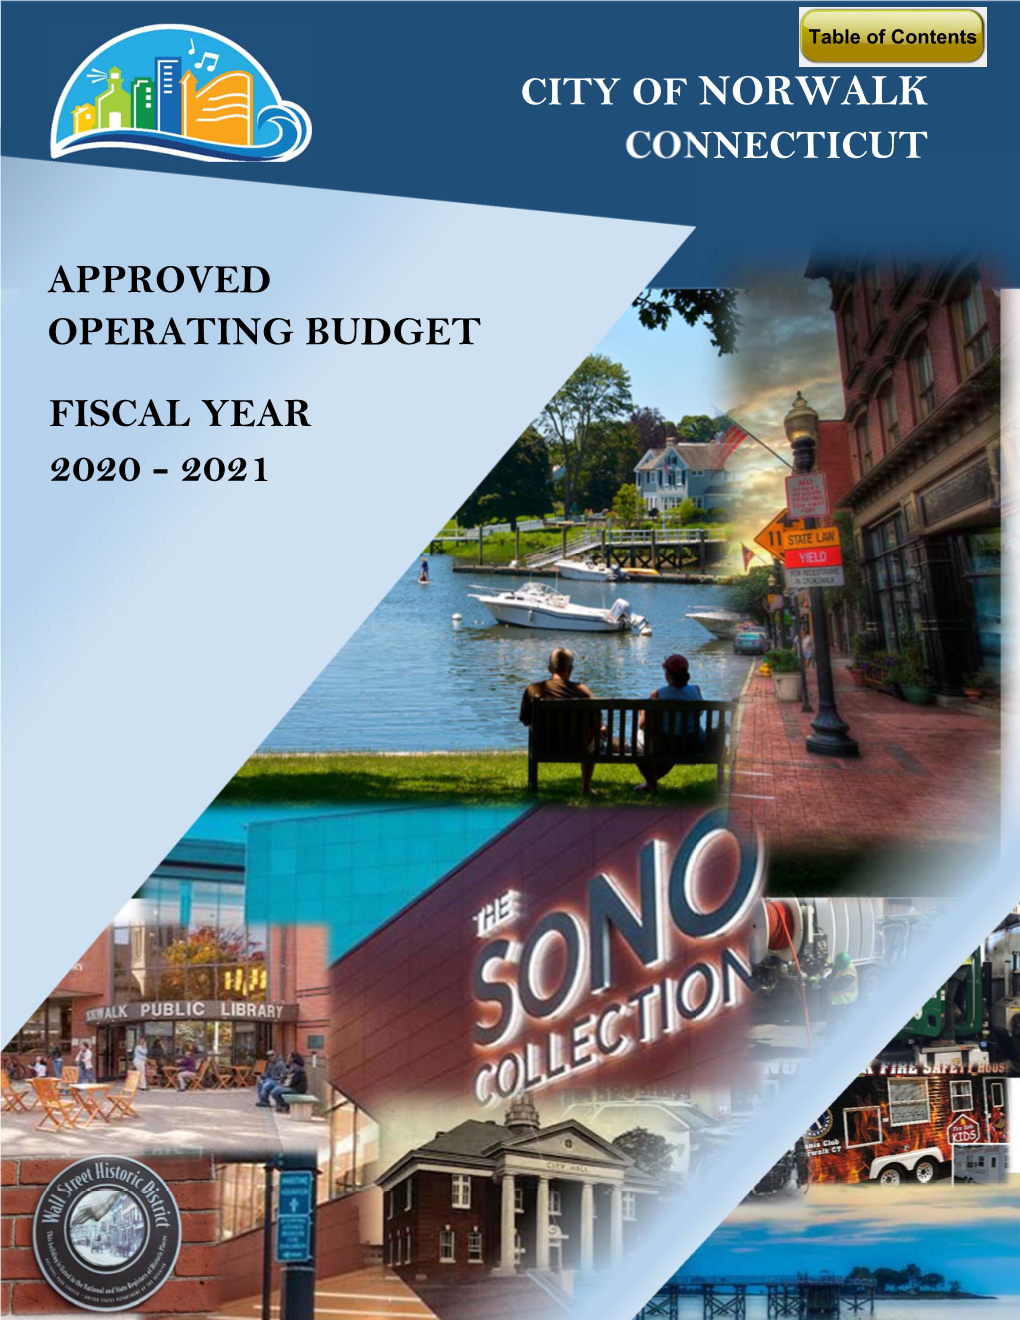 City of Norwalk Connecticut Fiscal Year Approved Operating Budget